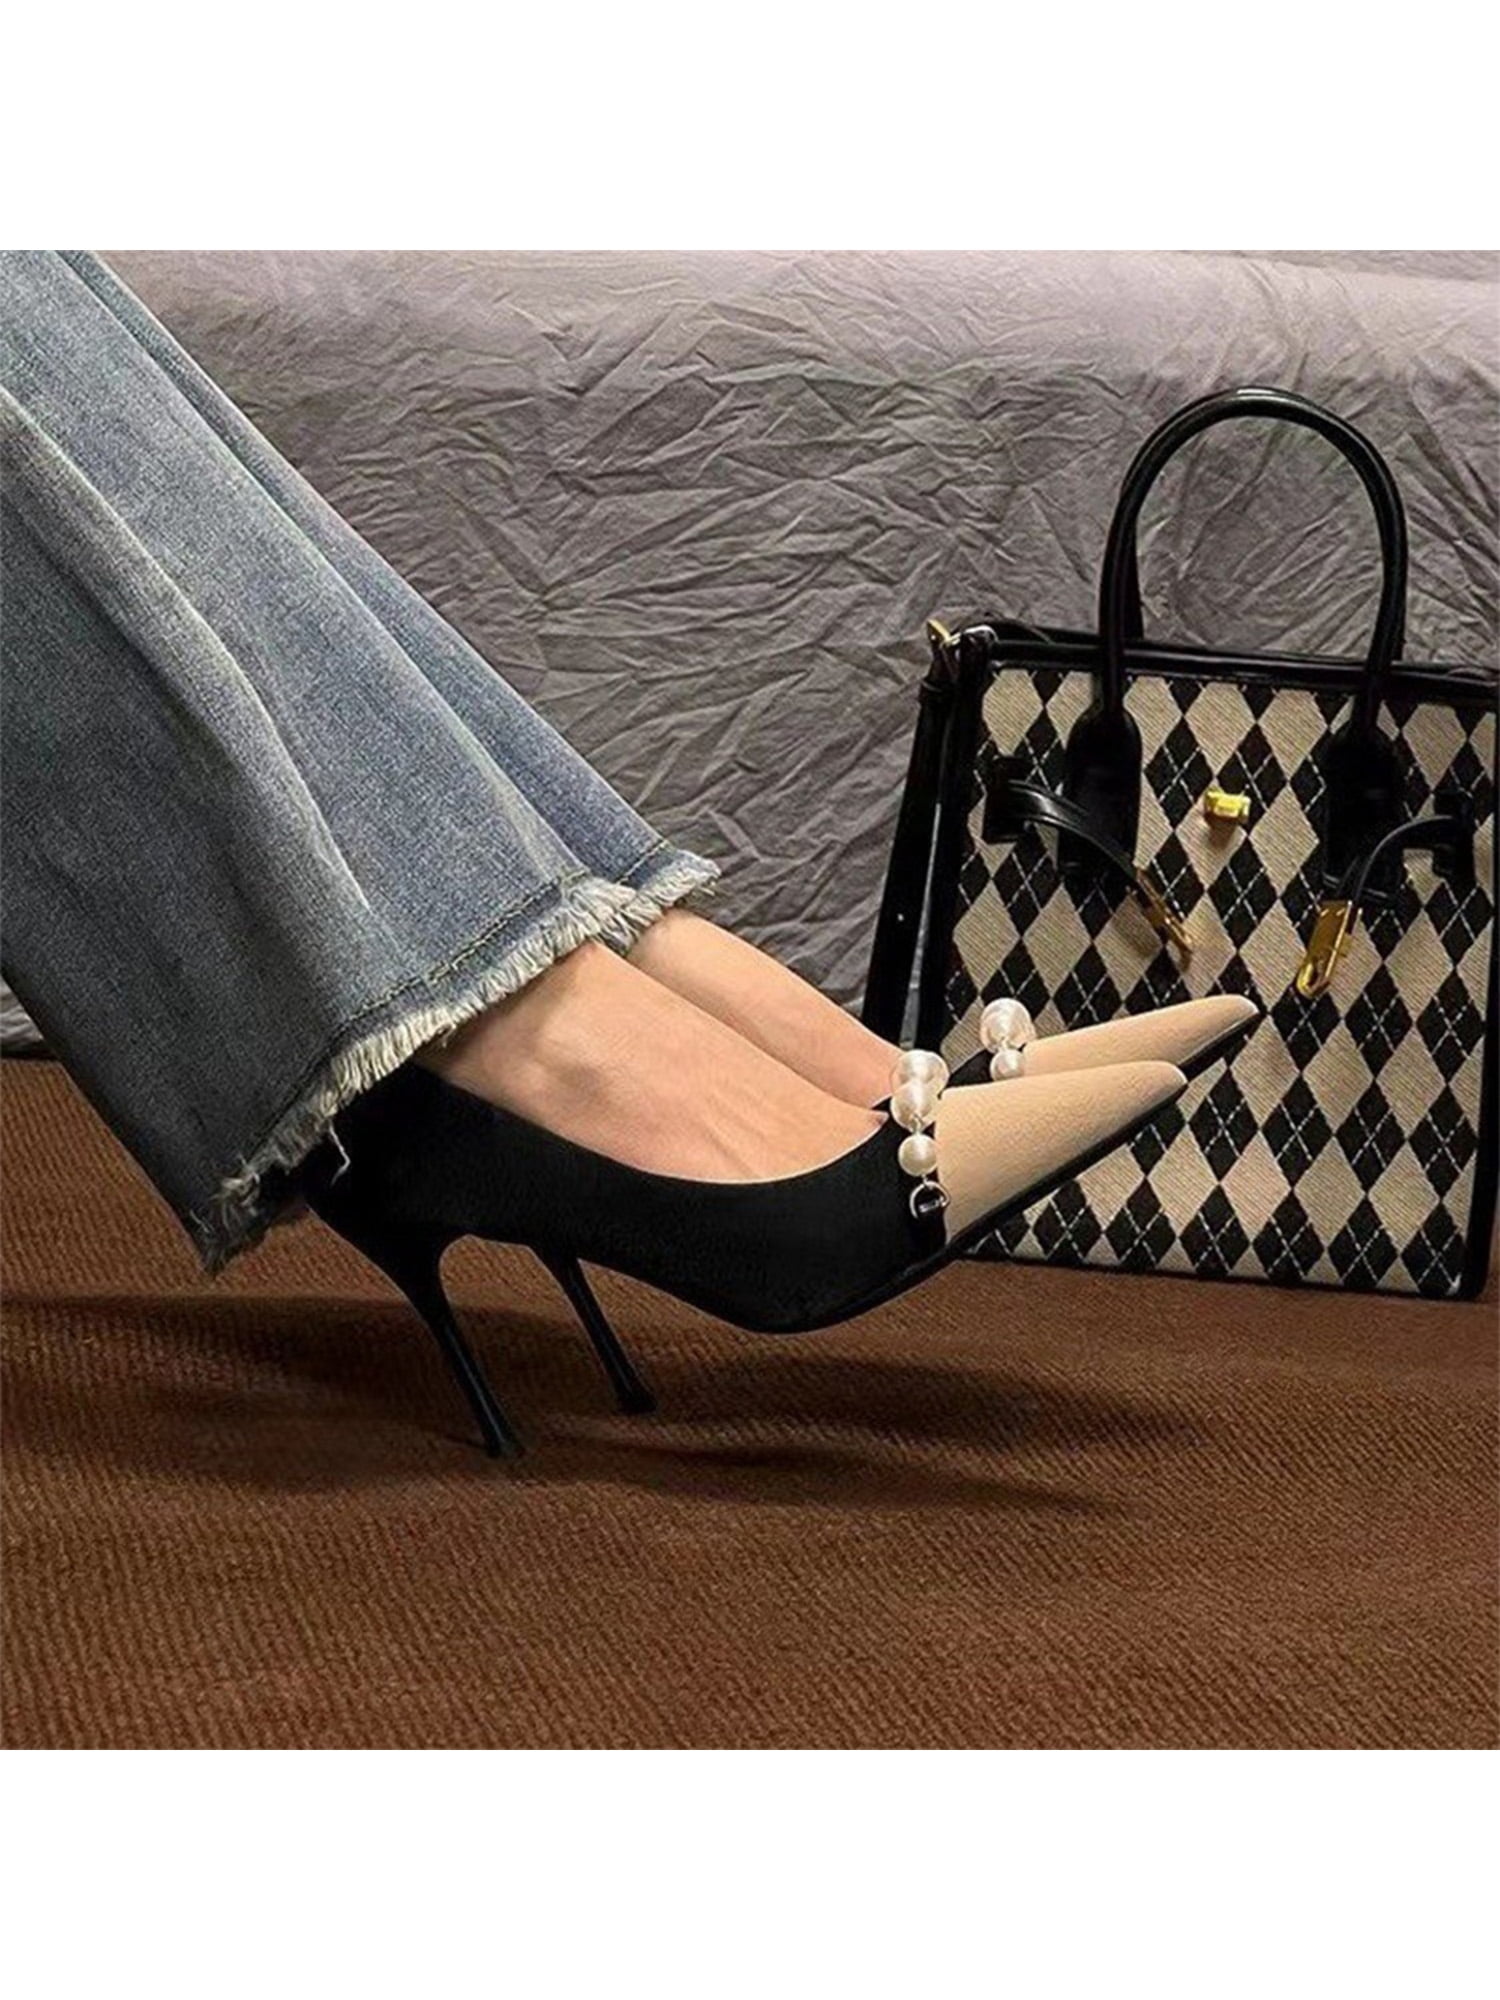 Yamini are the perfect pointed heels for work and play, with a solid,  comfortable heel and a classic sling back, these are a must have… |  Instagram